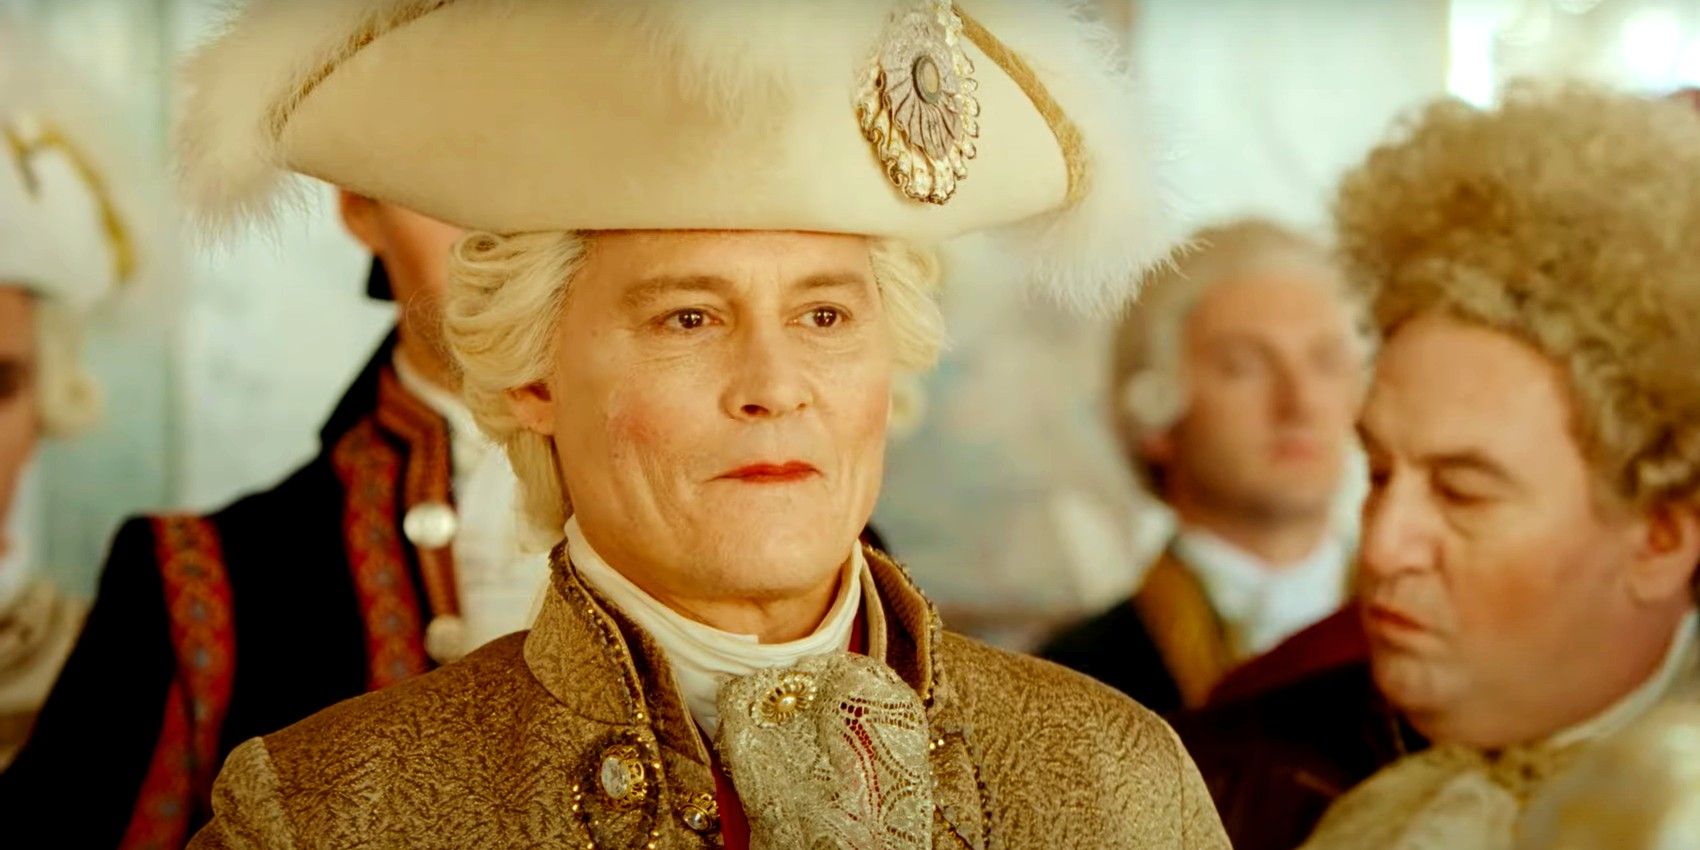 Johnny Depp as a French royal containing his smile in Jeanne Du Barry